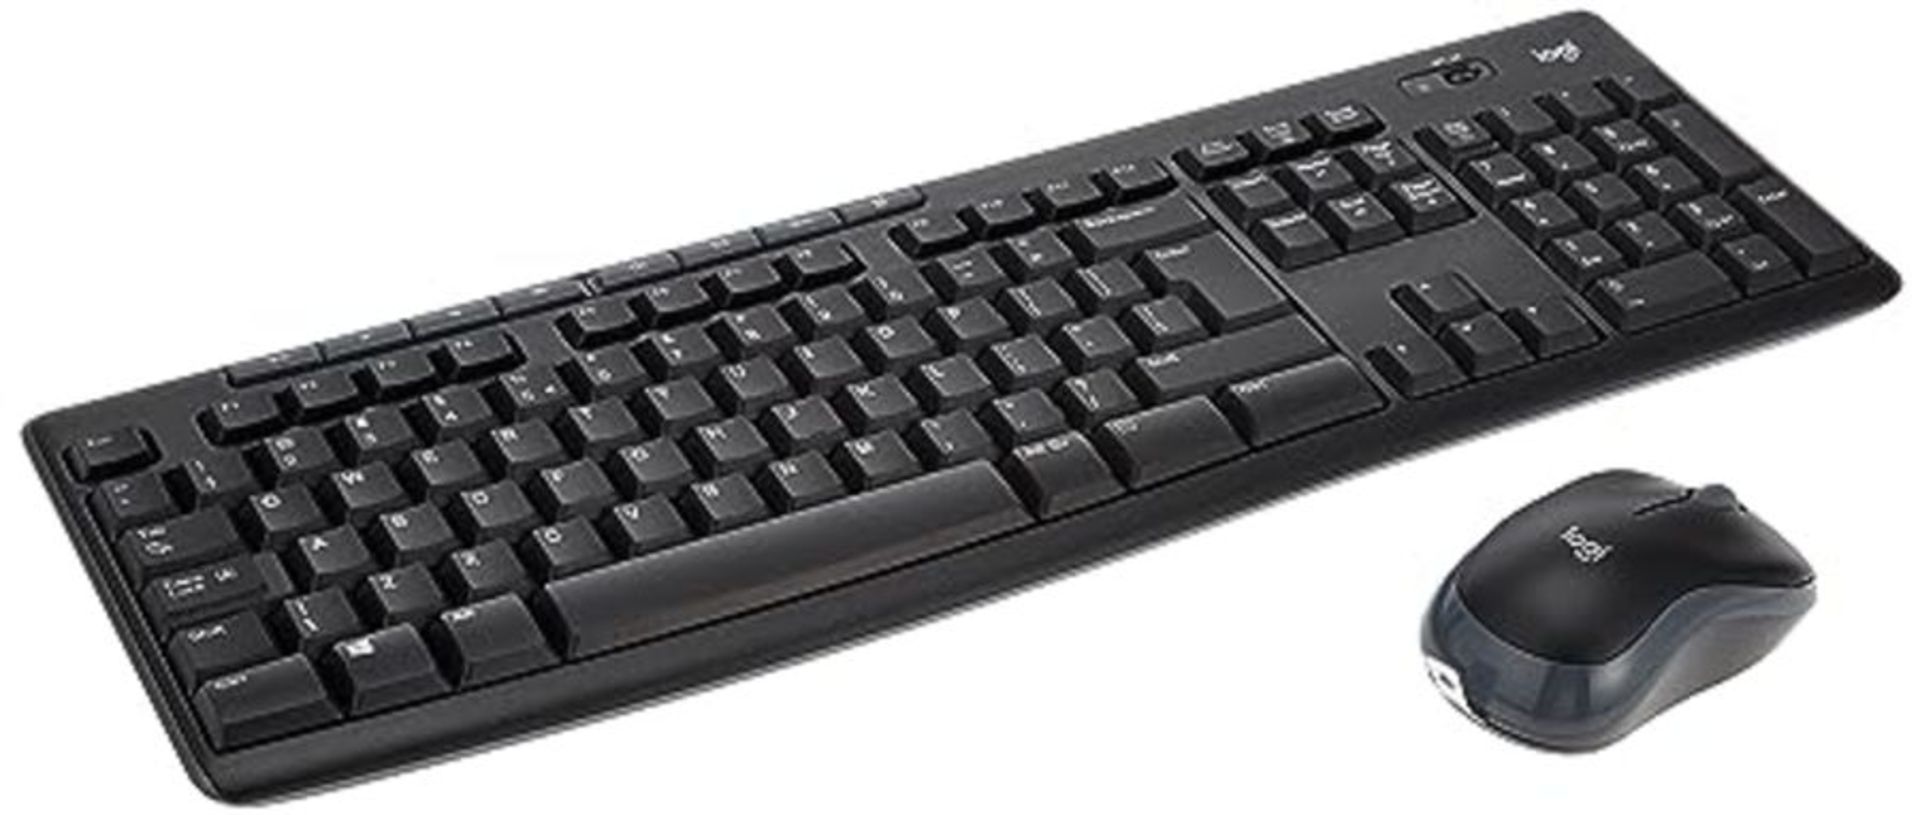 [INCOMPLETE] [CRACKED] Logitech MK270 Wireless Keyboard and Mouse Combo for Windows, 2